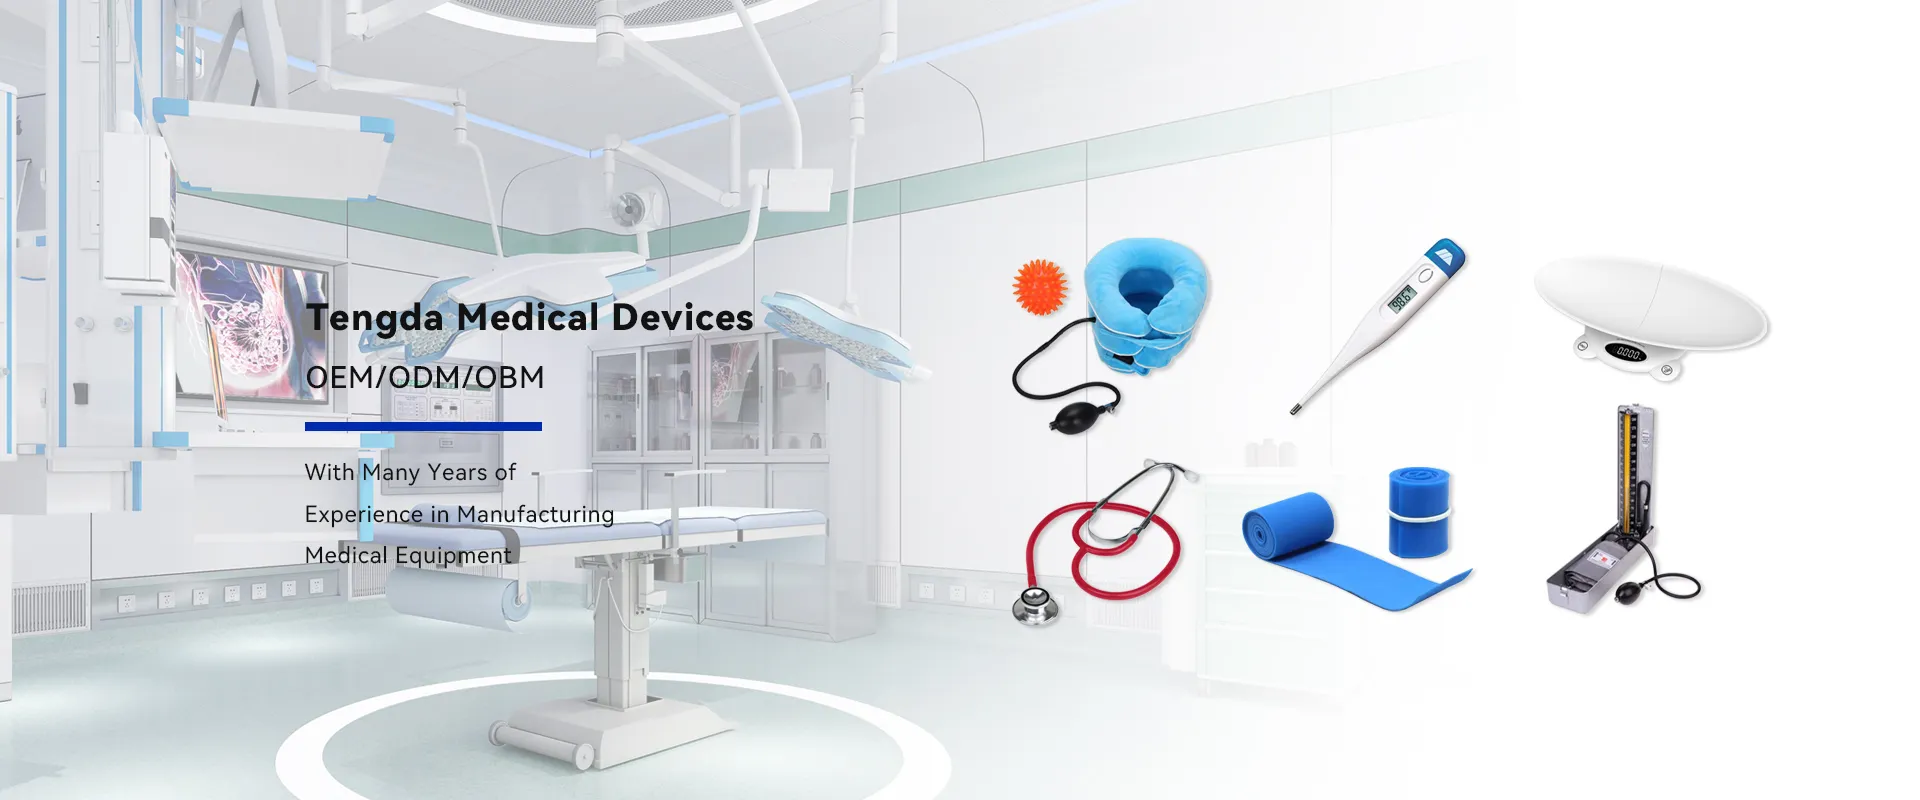 China Medical Devices